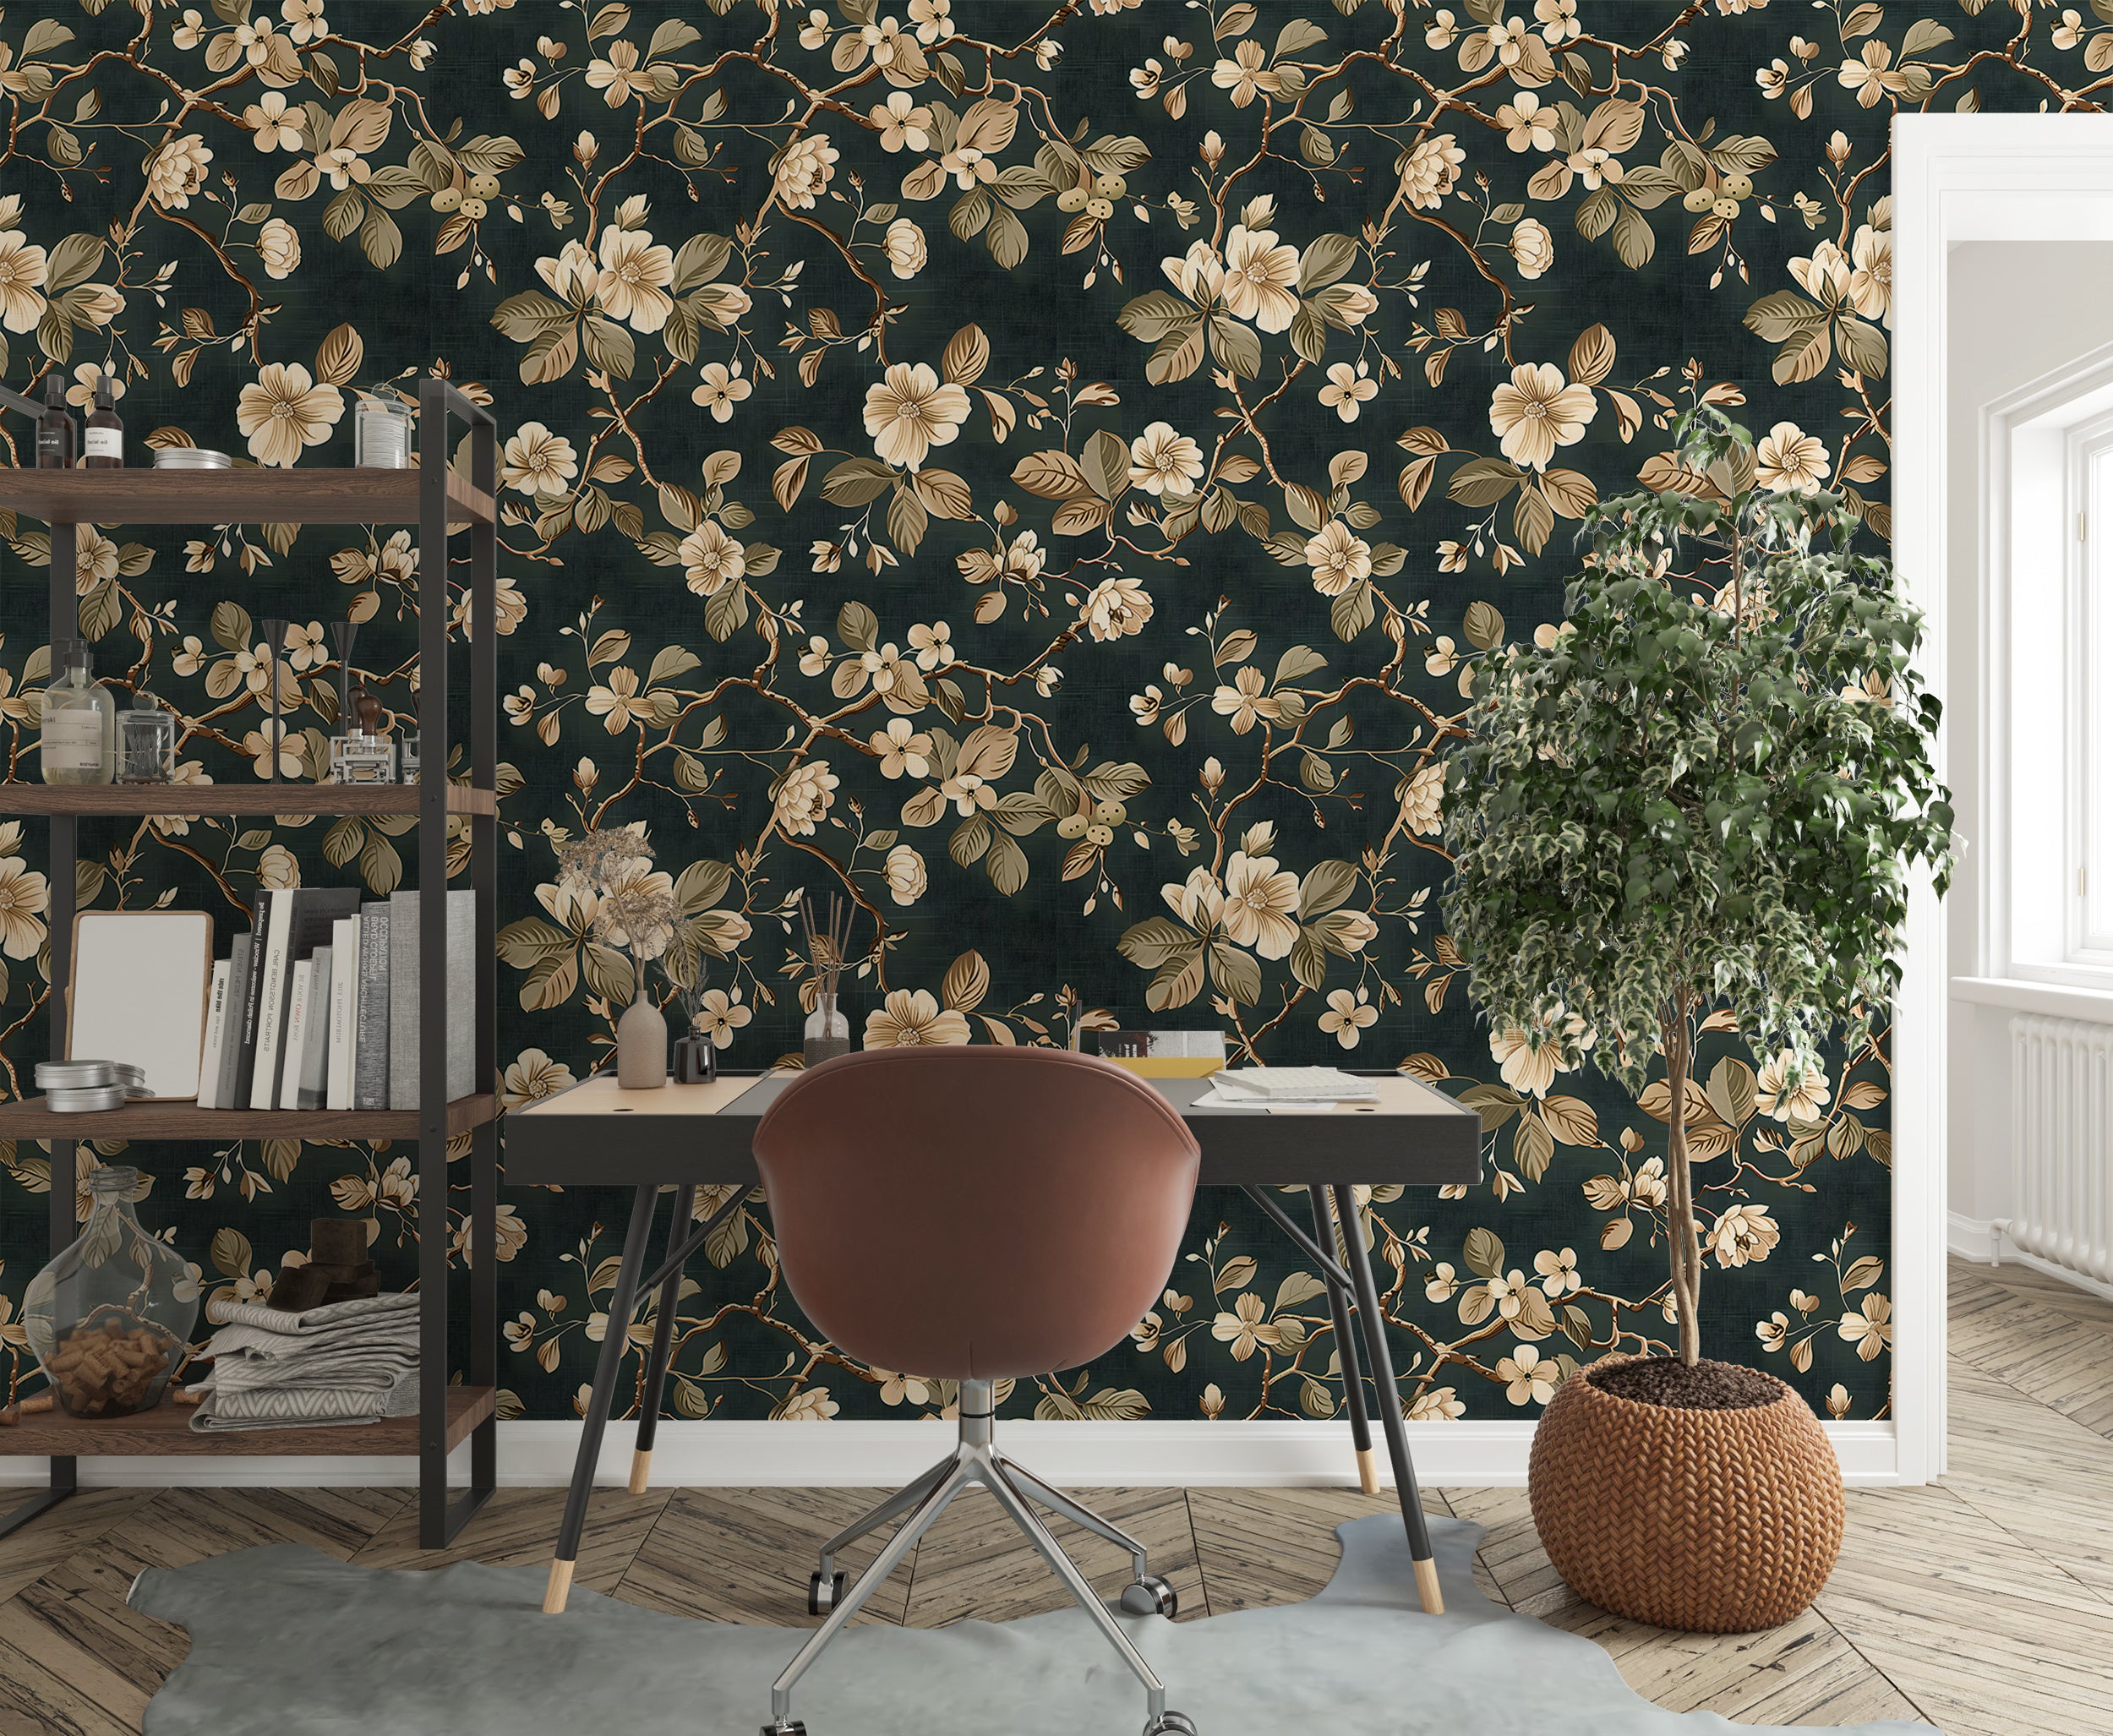 Green and gold floral wall decor